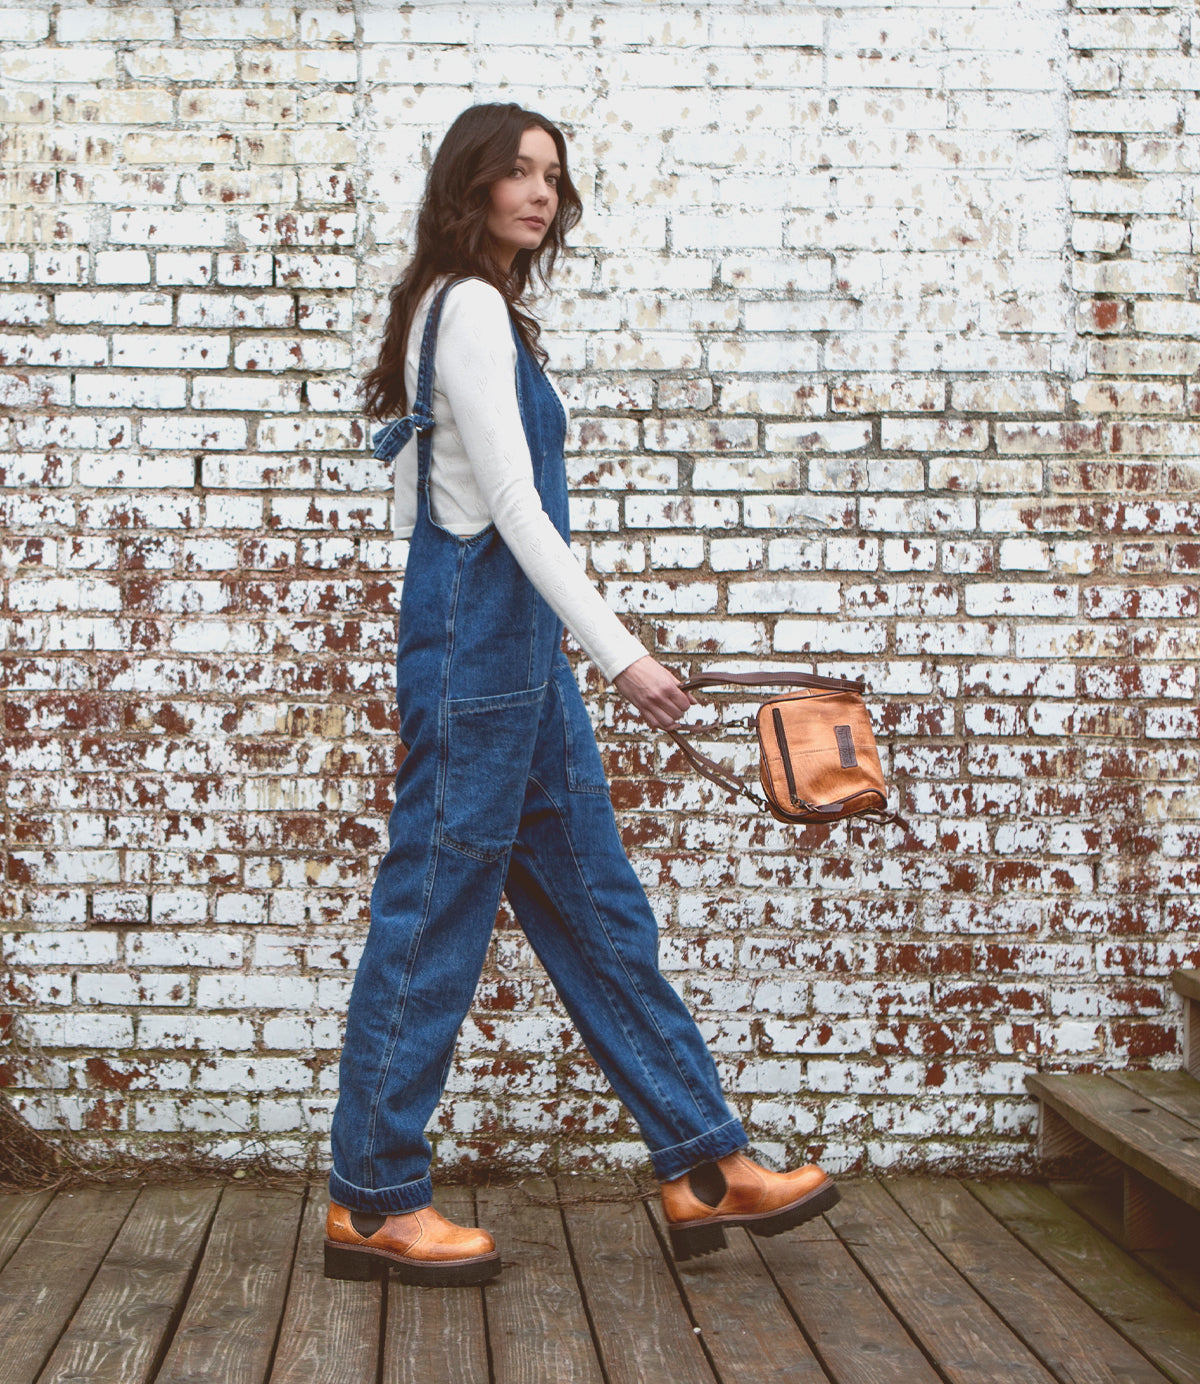 A woman wearing Bed Stu Valda Hi overalls and carrying a bag.